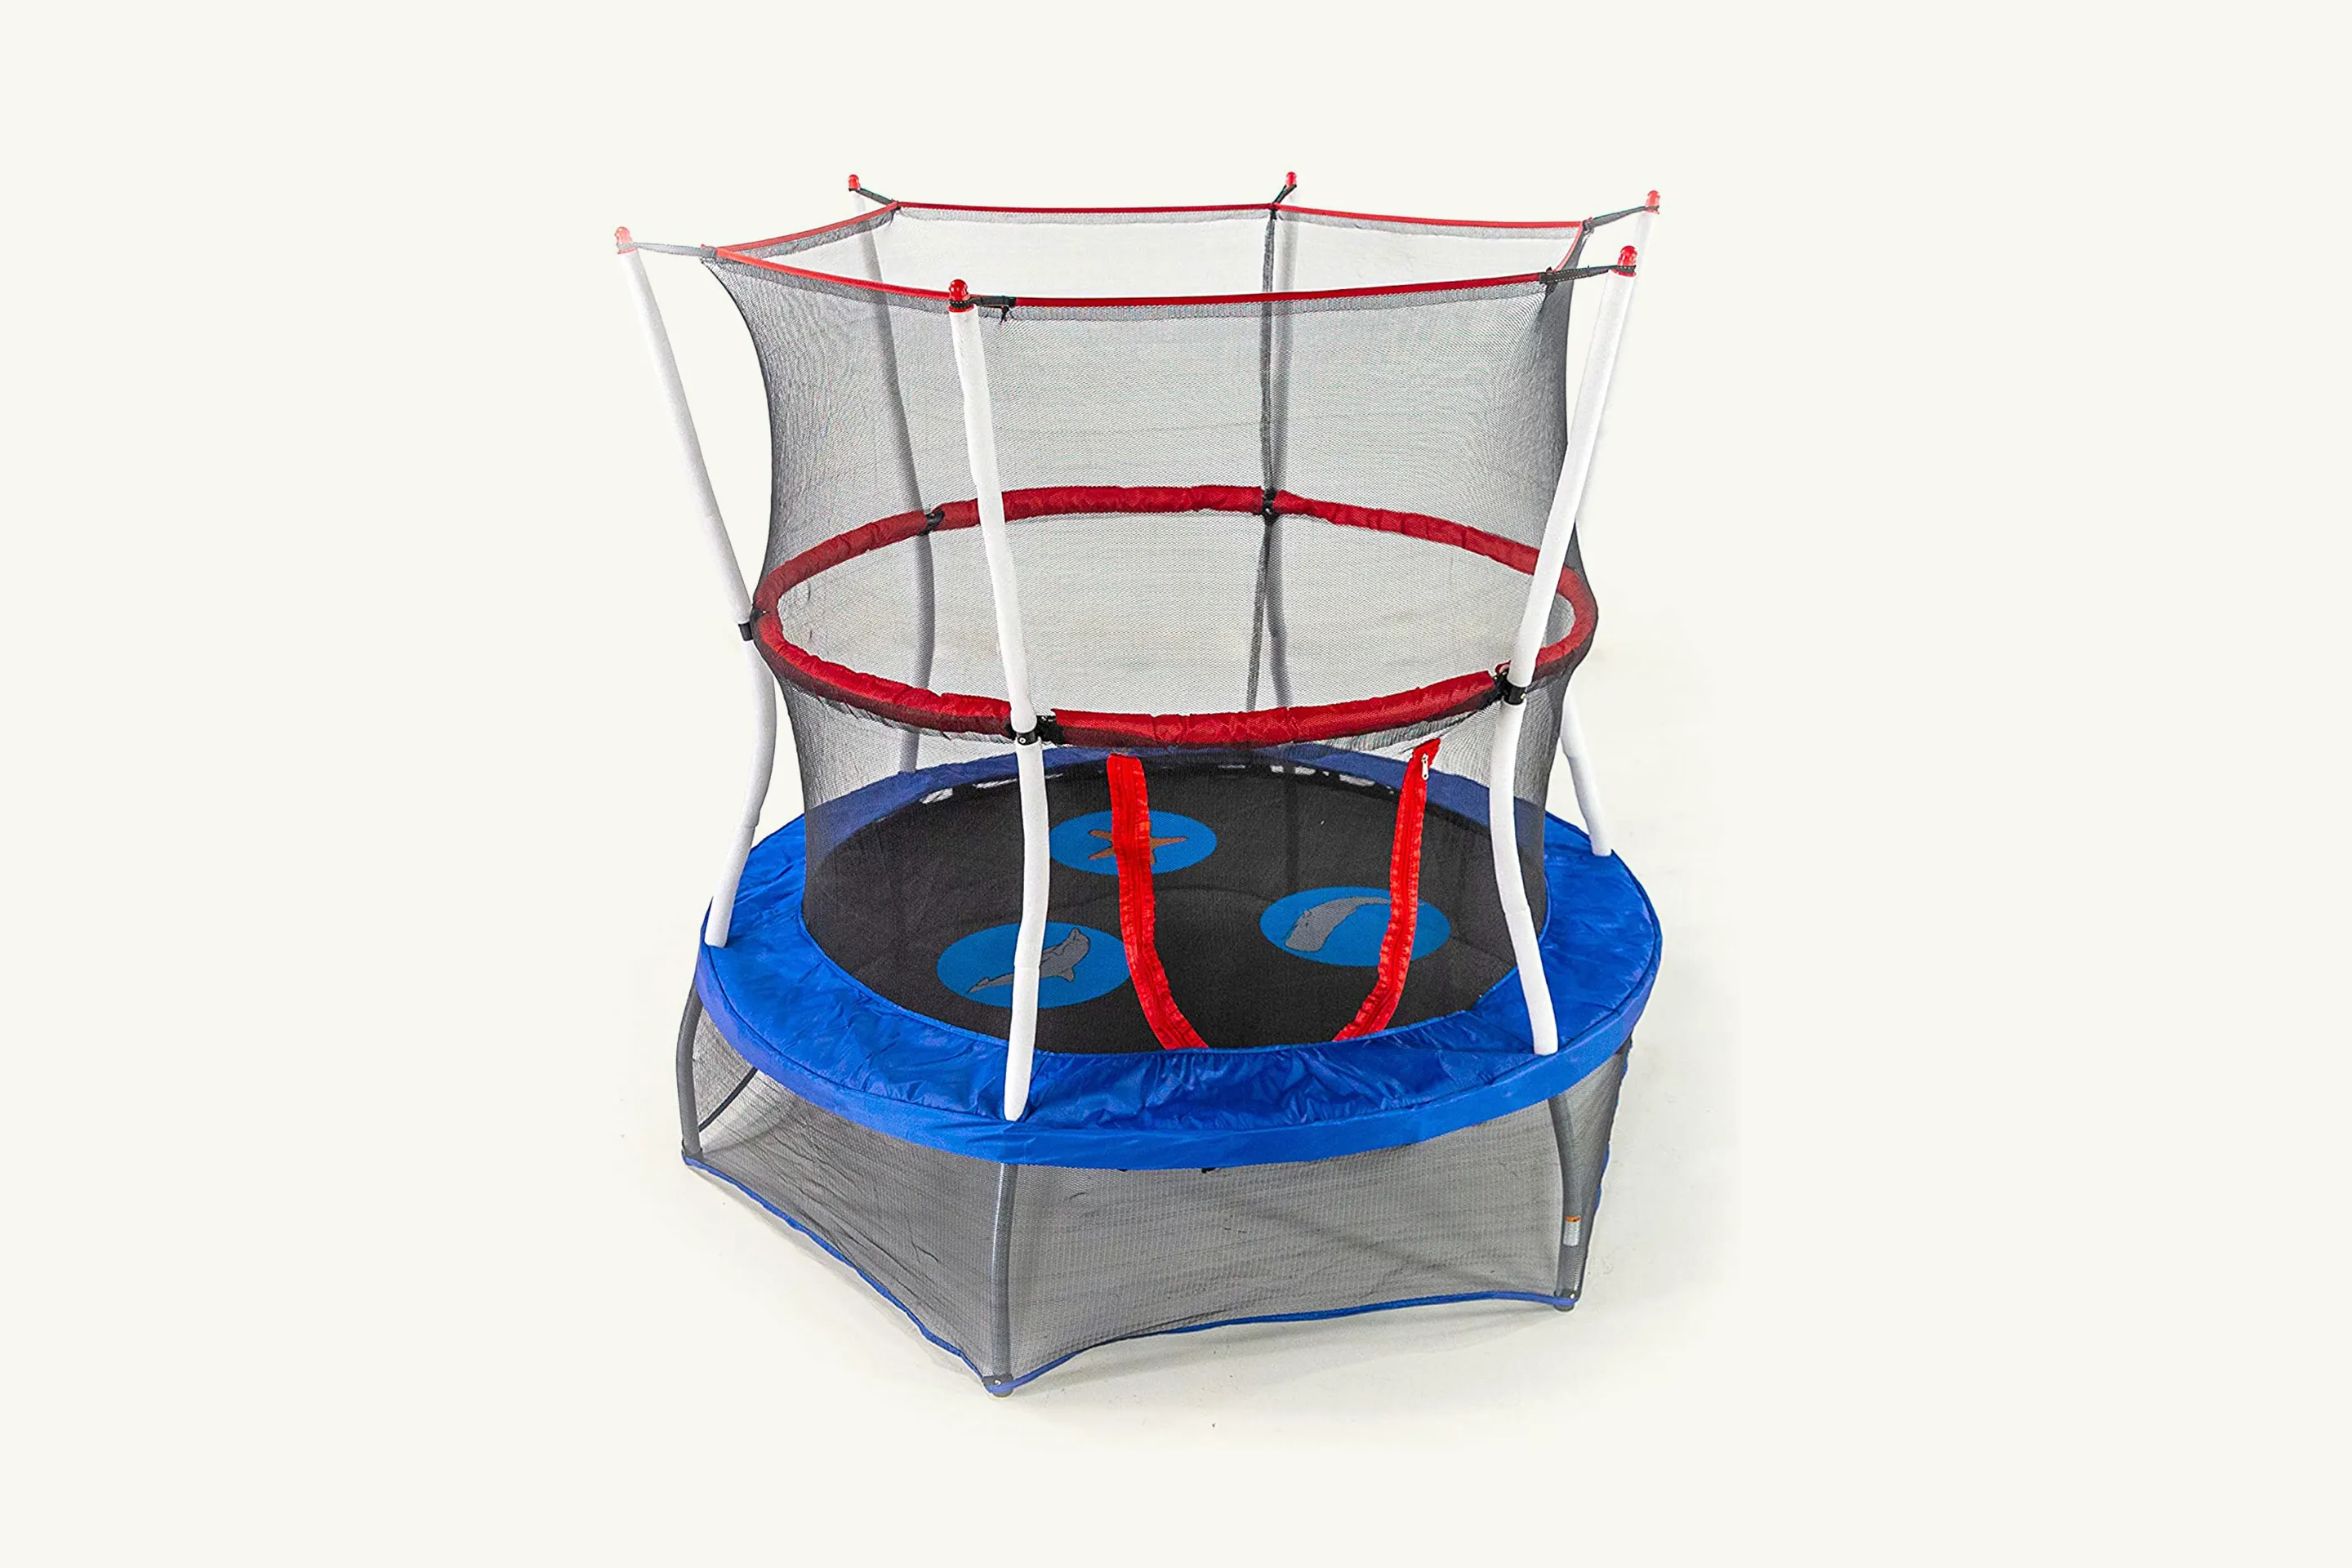 The Best Trampolines of 2023